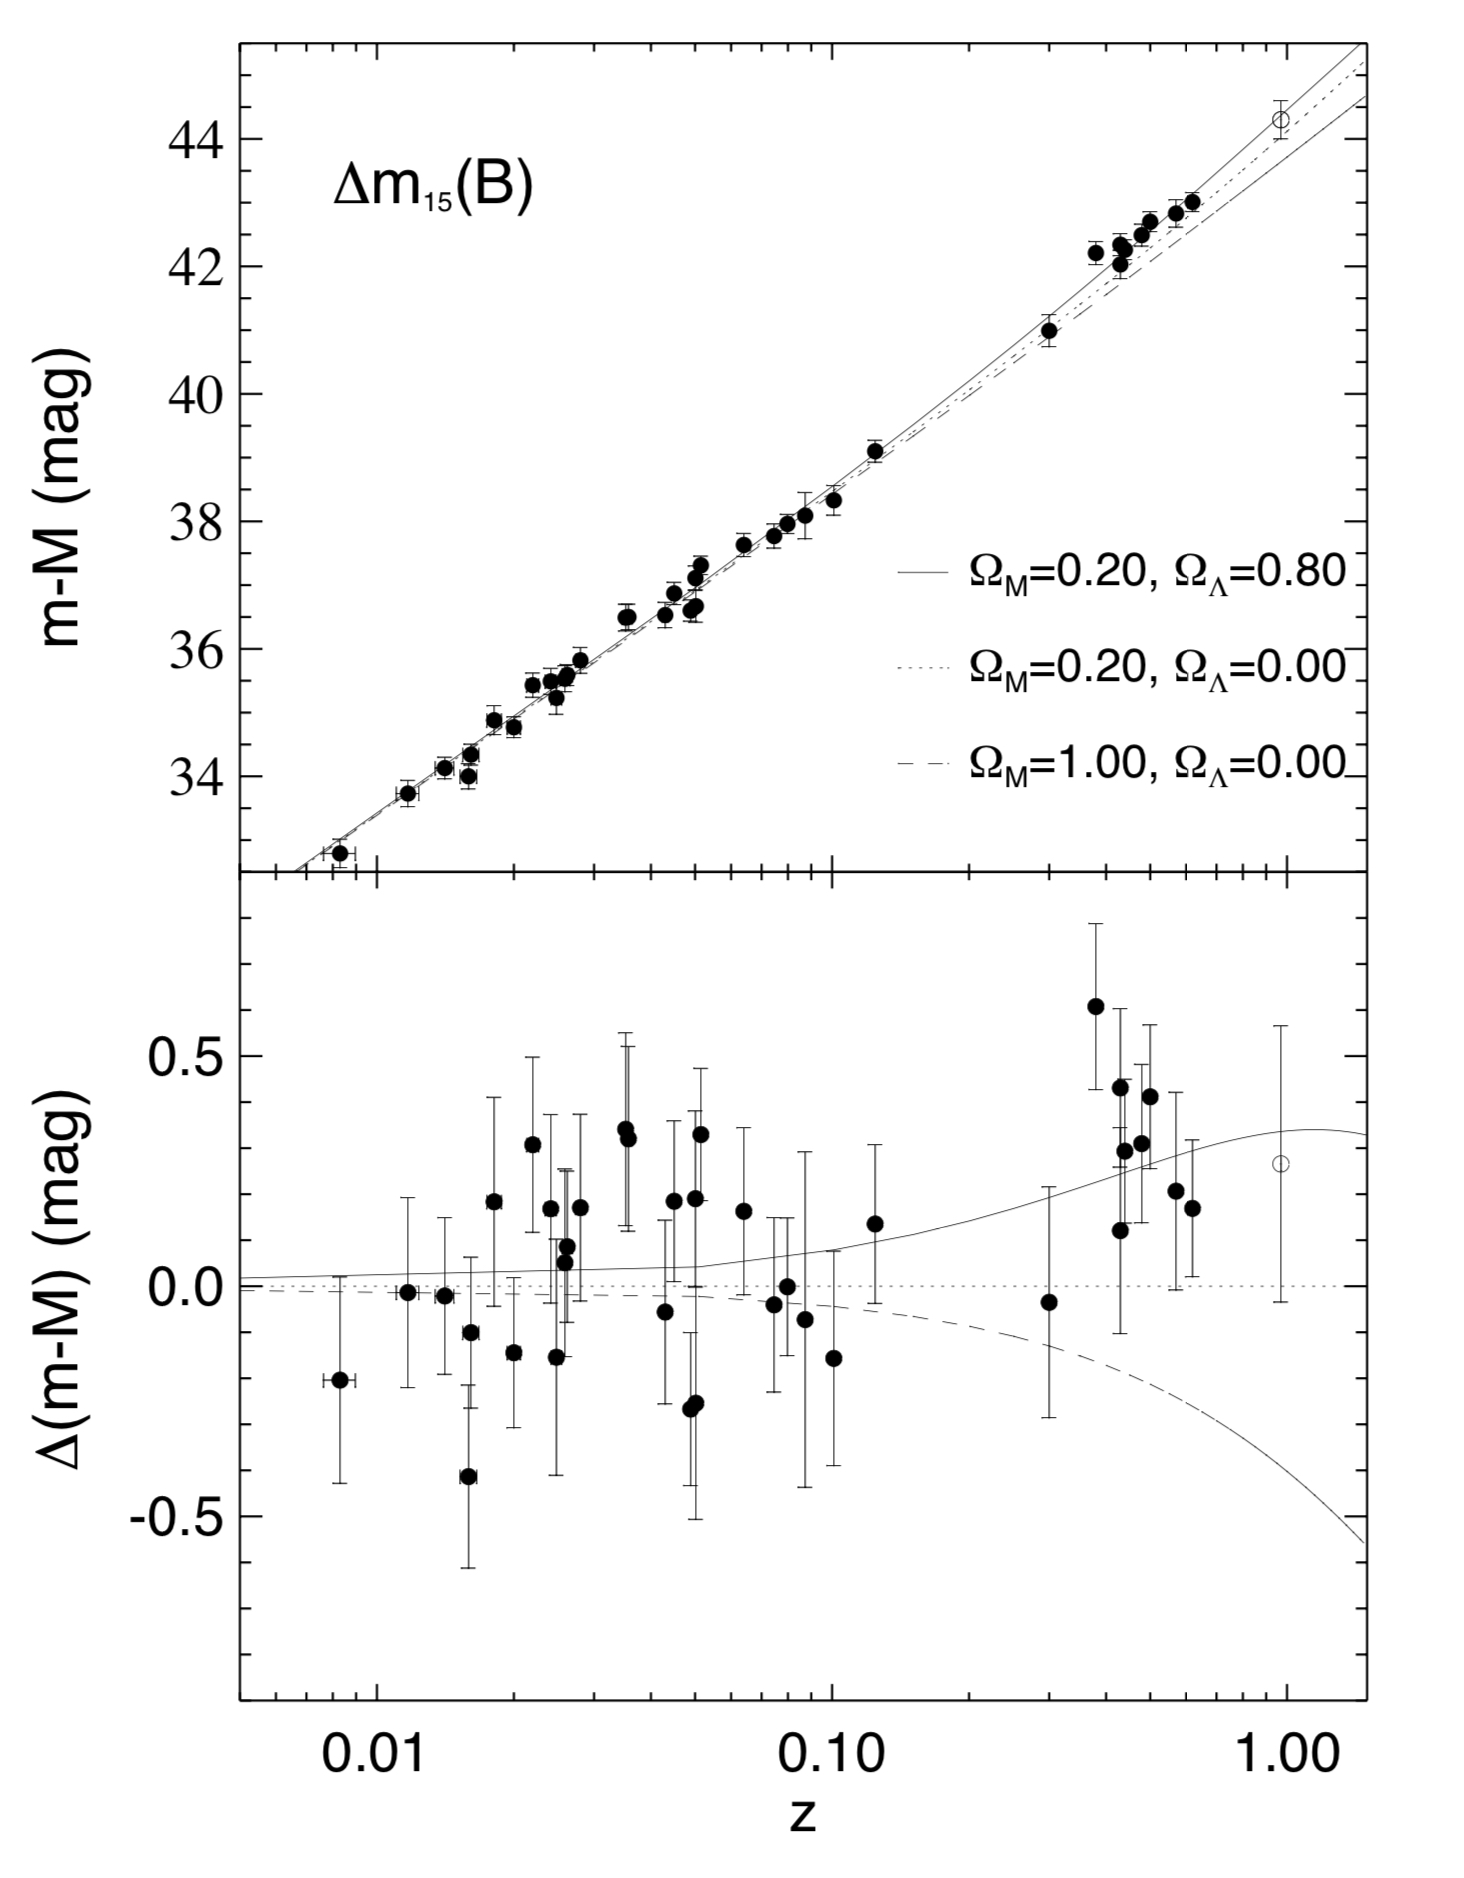 Top panel: Hubble diagram showing distance as a function of redshift for a sample of supernova host galaxies. Bottom panel: Here $\Delta(m-M)$ represents the difference in distance modulus from a model assuming no dark energy contribution $(\Omega_{\Lambda} = 0.00)$. The model that best fits the observed data has $\Omega_m = 0.20$ and $\Omega_{\Lambda} = 0.80$, showing a significant dark energy contribution. From @Riess1998.